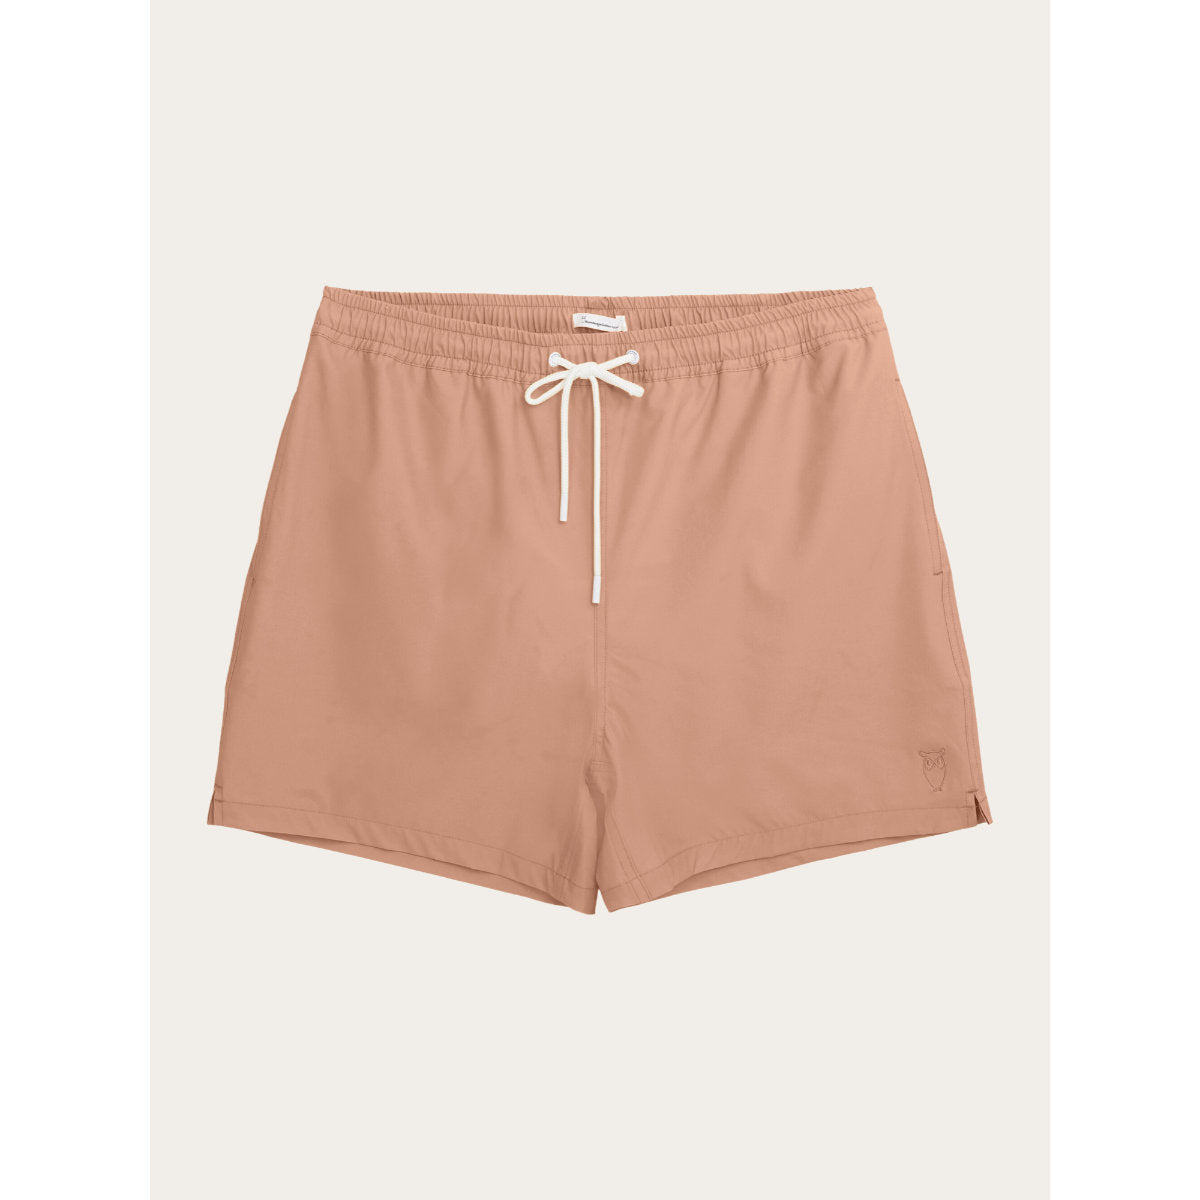 Badeshorts STRETCH mit recyceltem Material